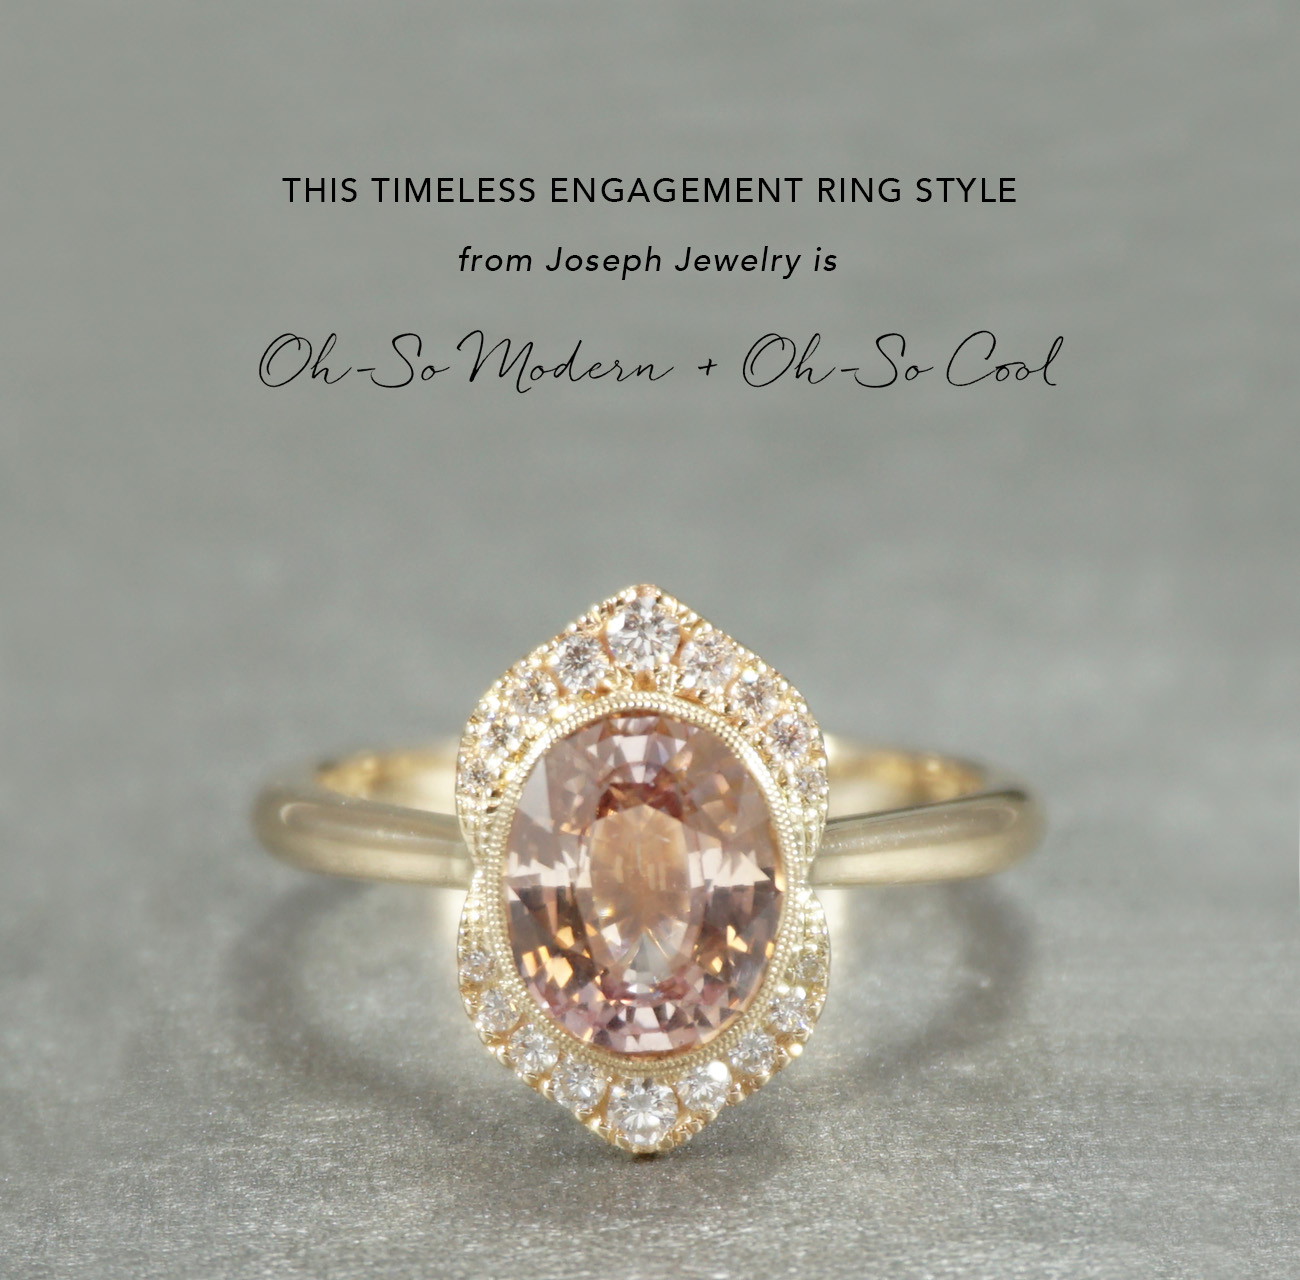 Oval Engagement Rings from Joseph Jewelry